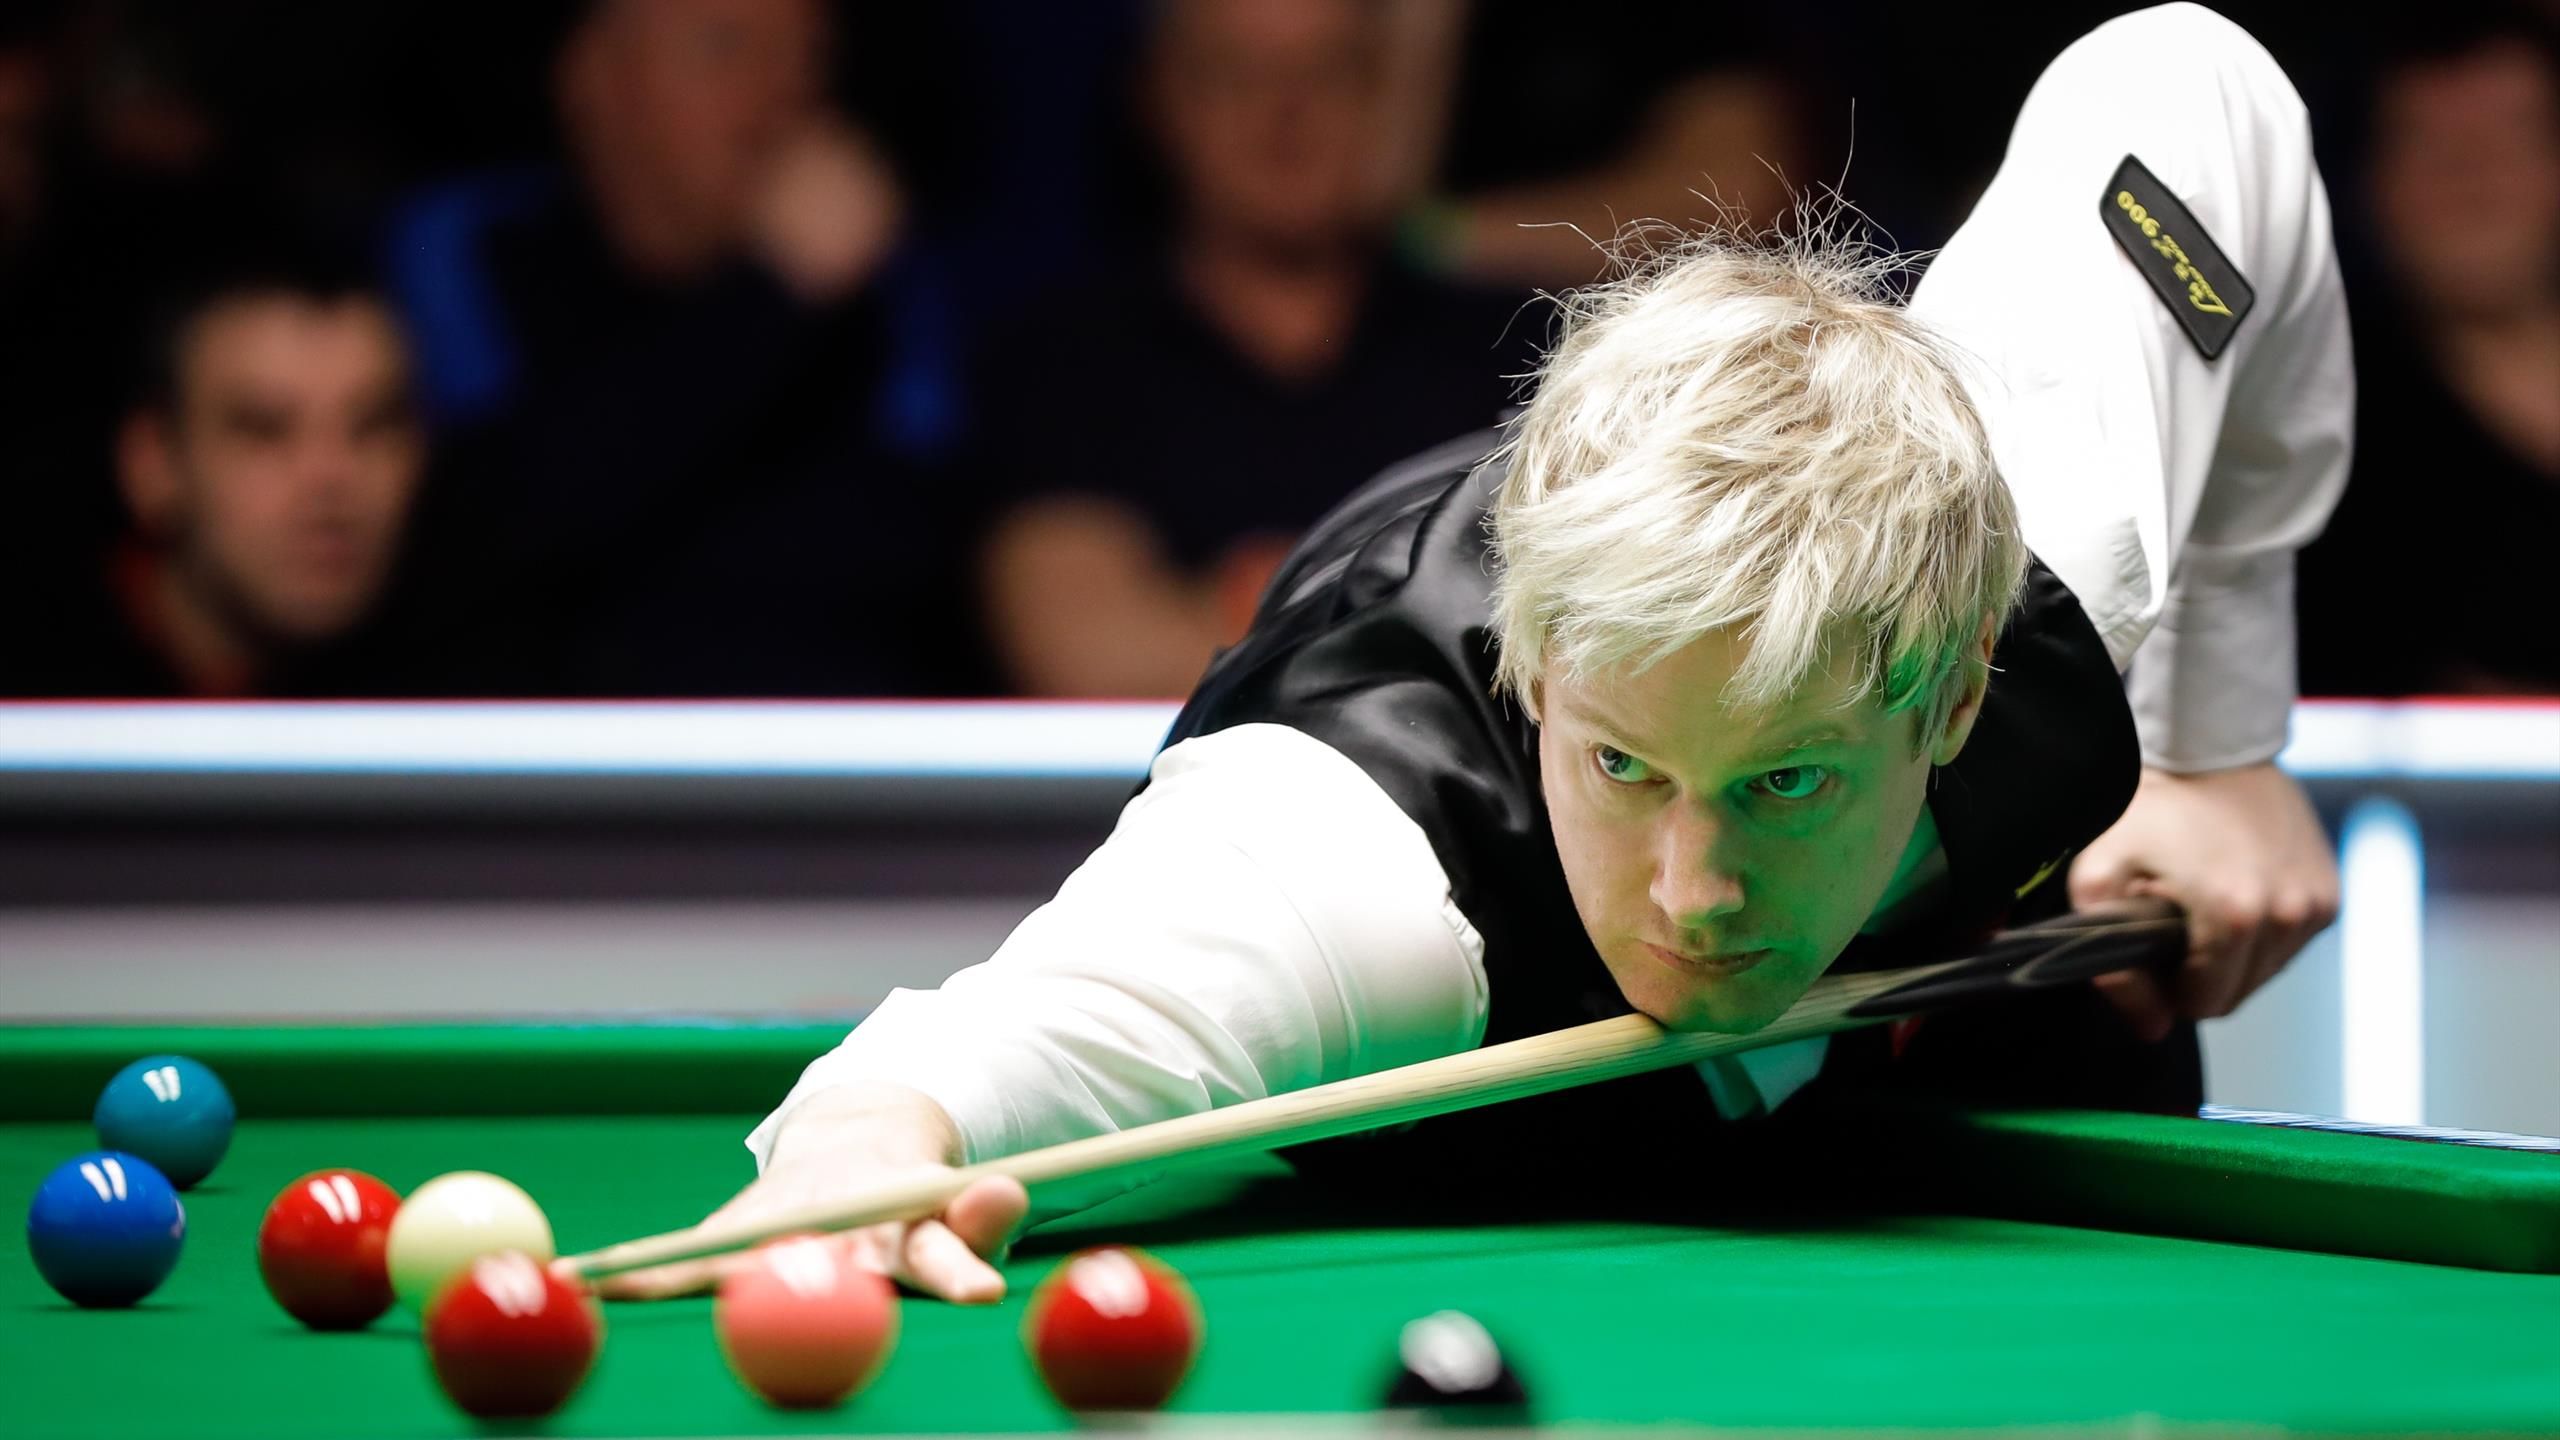 Neil Robertson trails Jamie Jones after first session in 2024 World Snooker Championship qualifying – Judgement Day